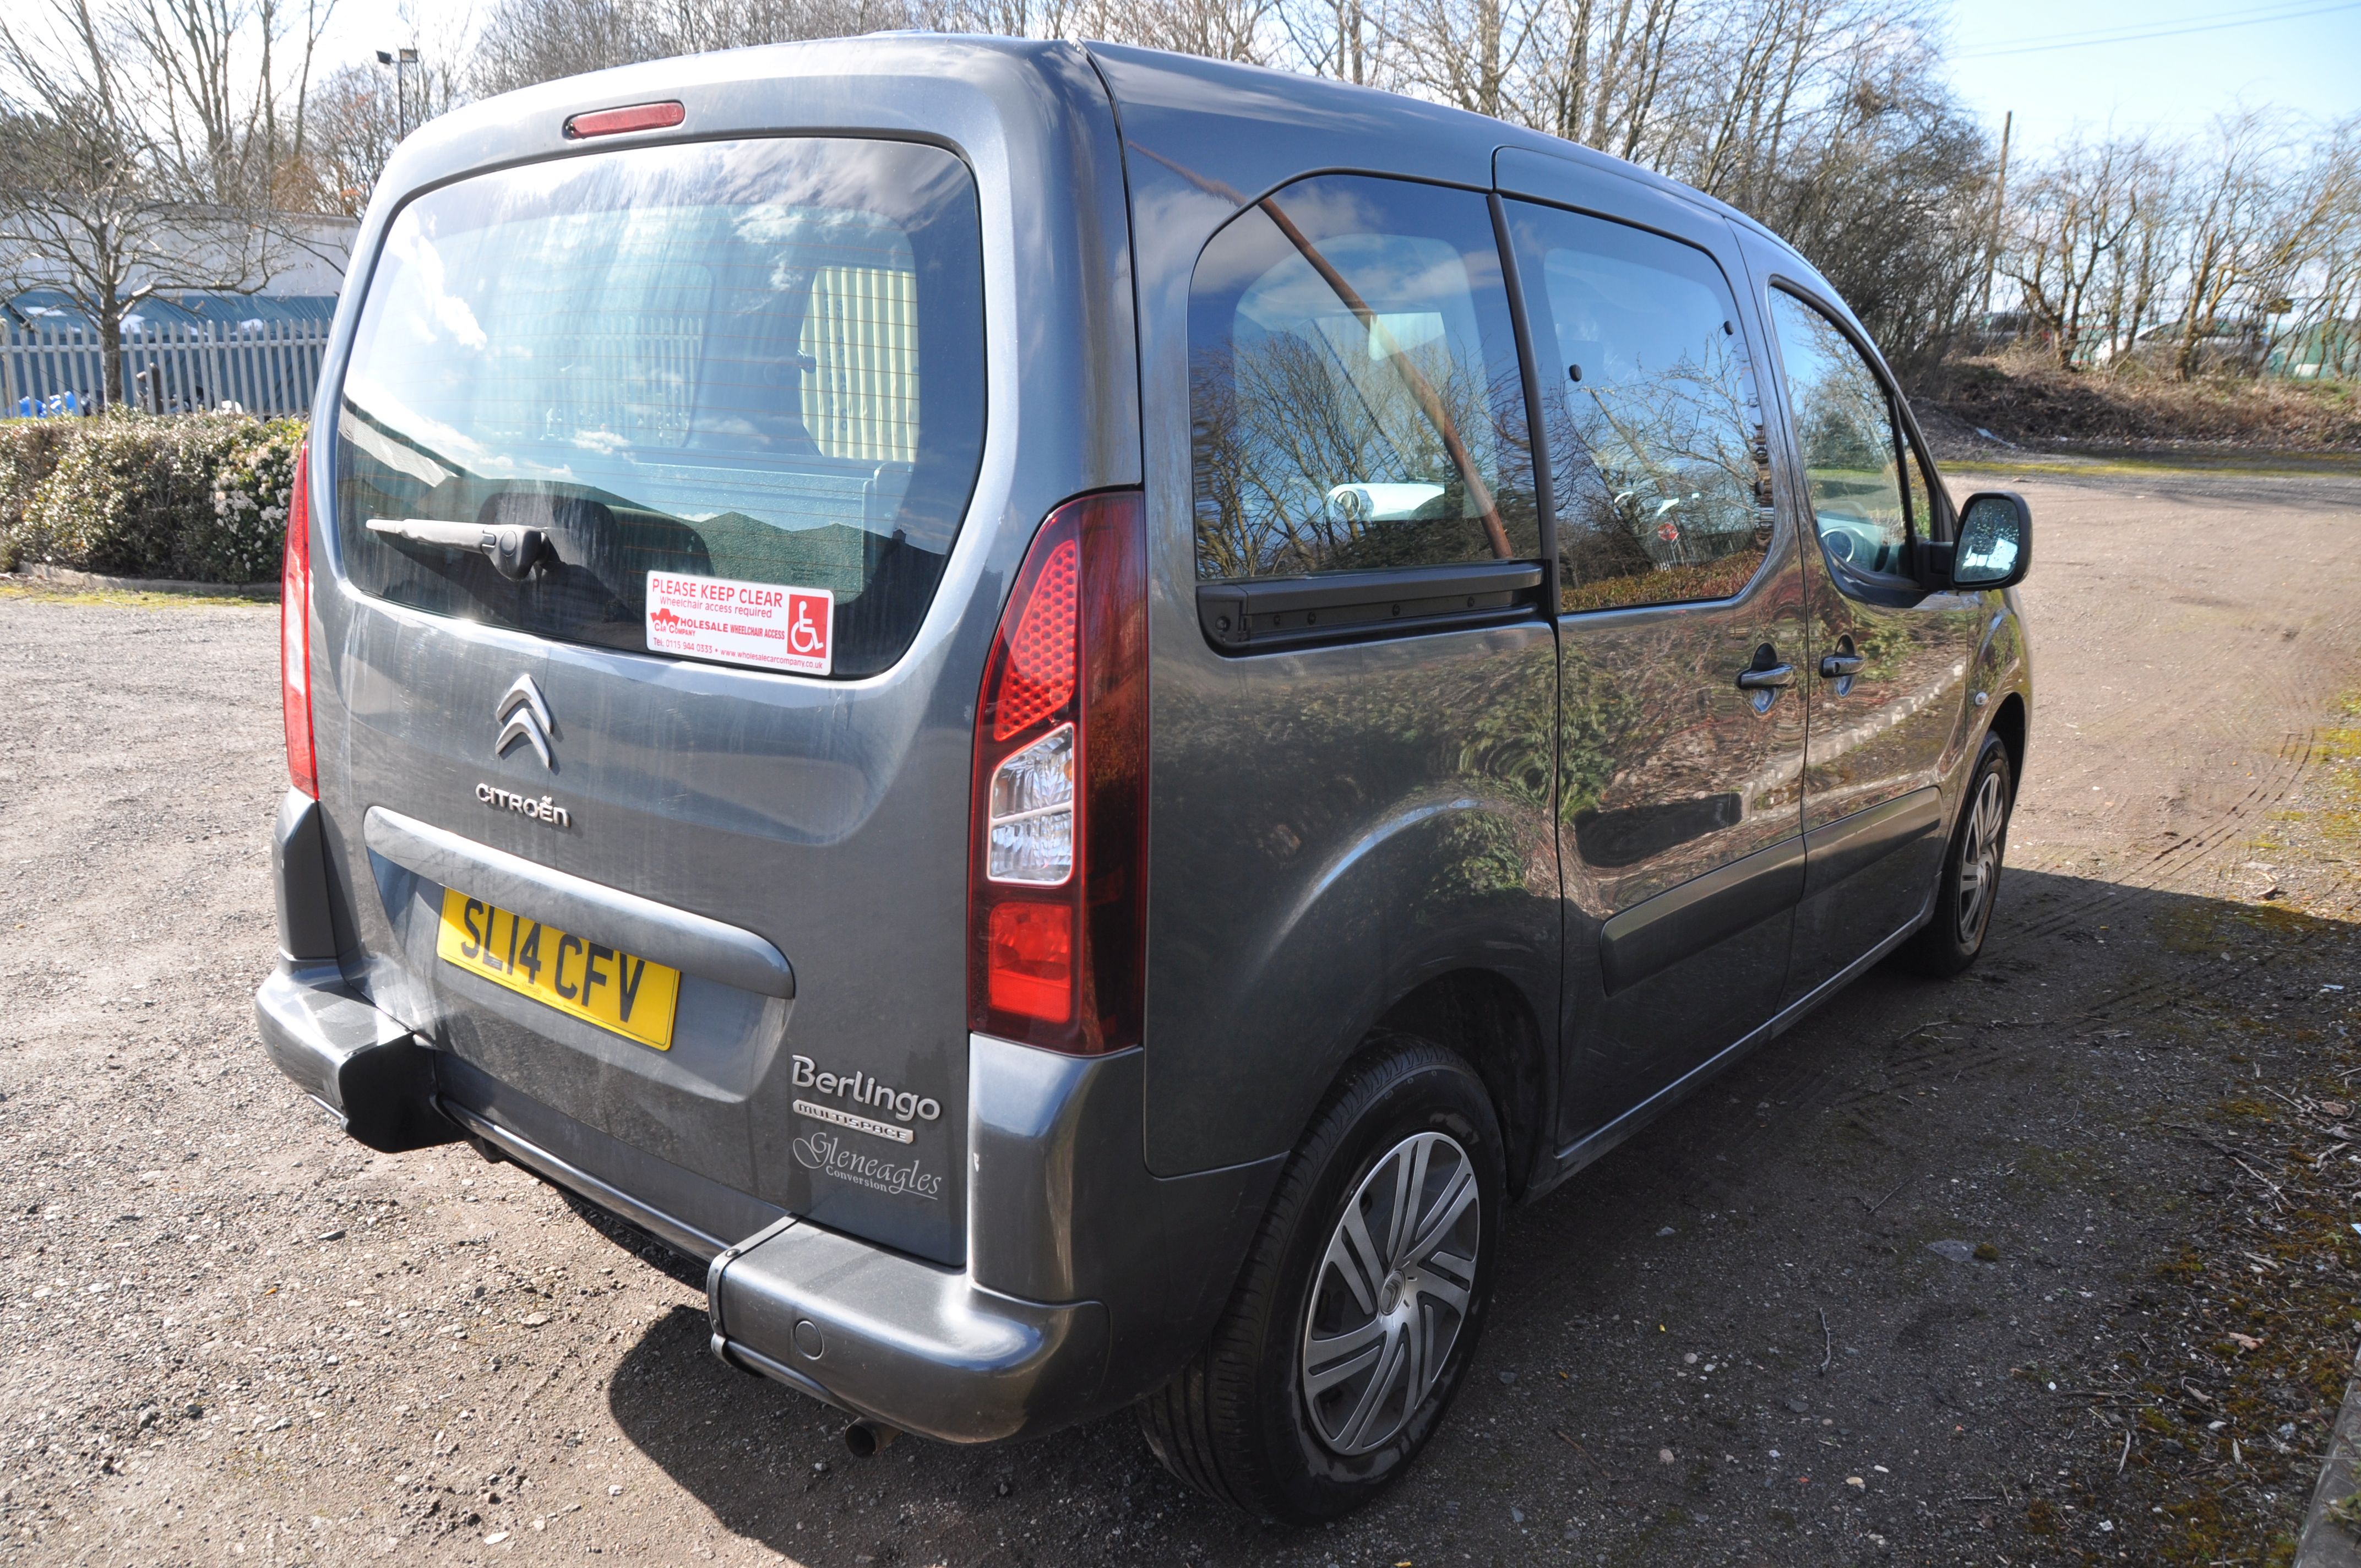 A 2014 CITROEN BERLINGO MULTISPACE GLENEAGLES CONVERSION in grey with two front and one rear seat - Image 6 of 11